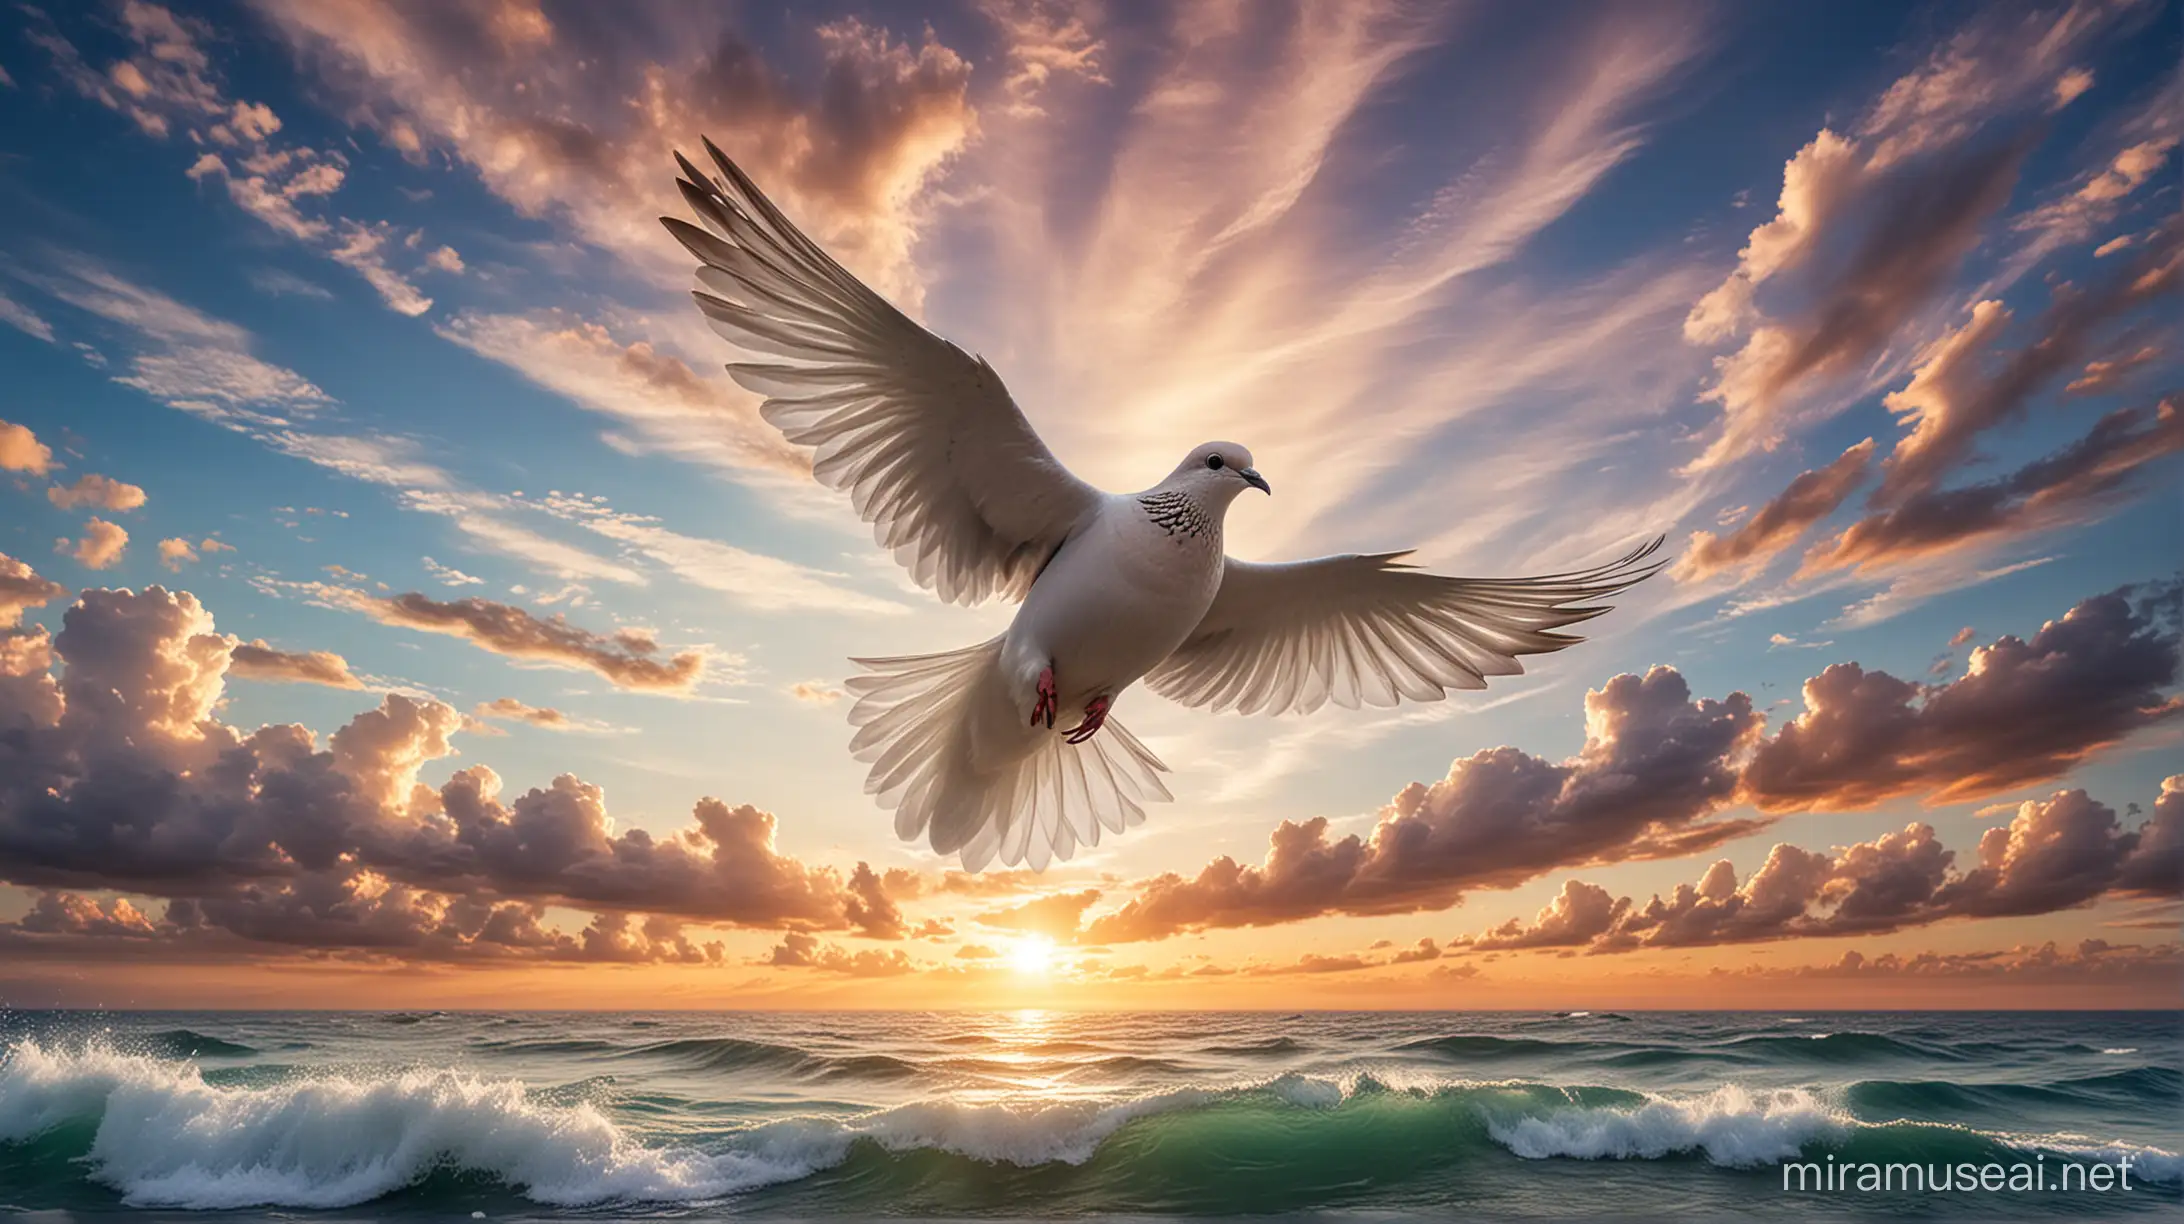 A picture of a Dove flying in a magnificent sky over the ocean.